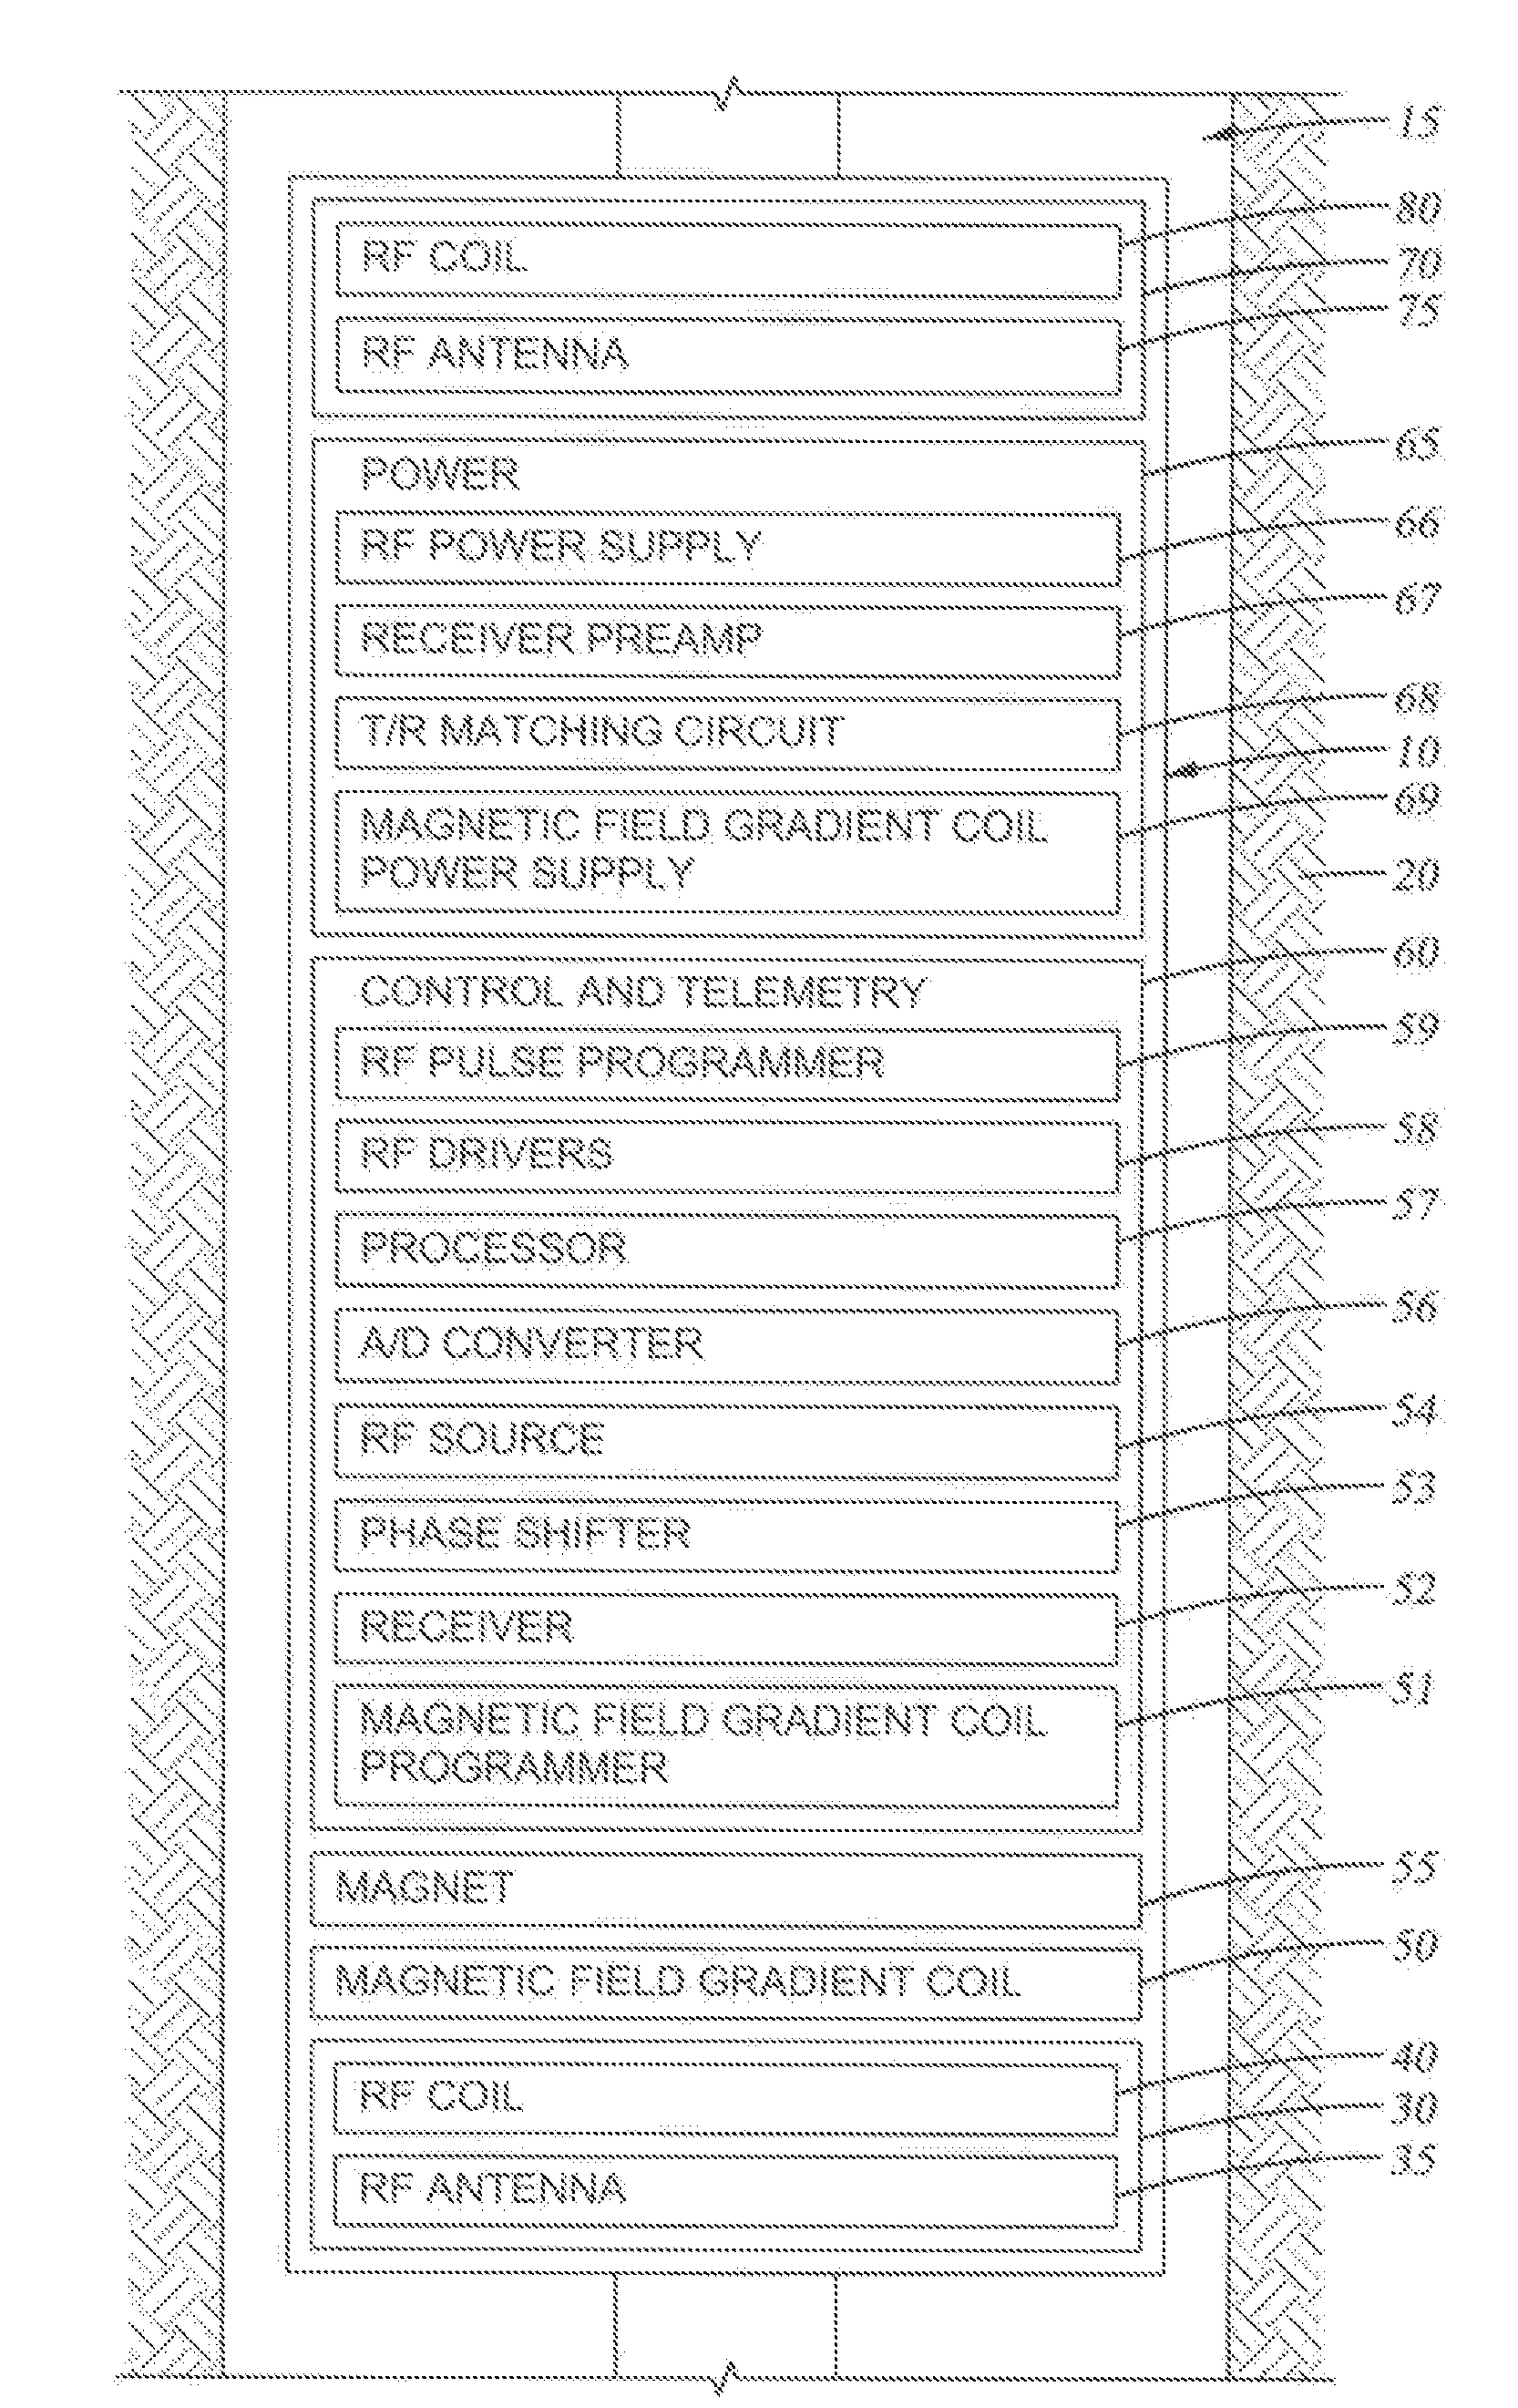 System and Method for Downhole Time-of-Flight Sensing, Remote NMR Detection of Fluid Flow in Rock Formations